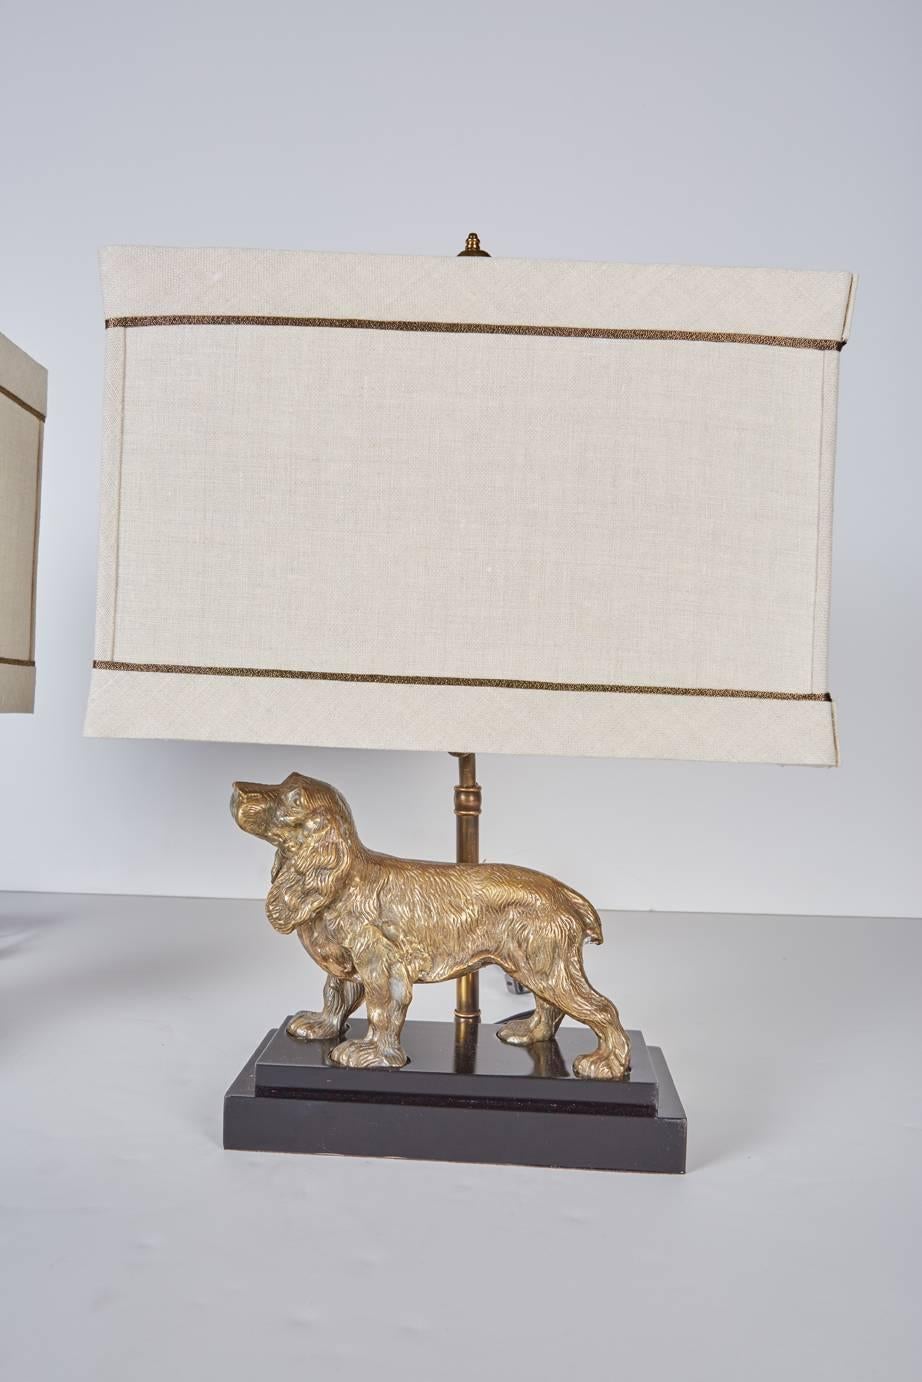 Pair of vintage brass spaniels mounted as lamps on custom, black lacquered bases with custom beige linen shades trimmed in antiqued gold cord.